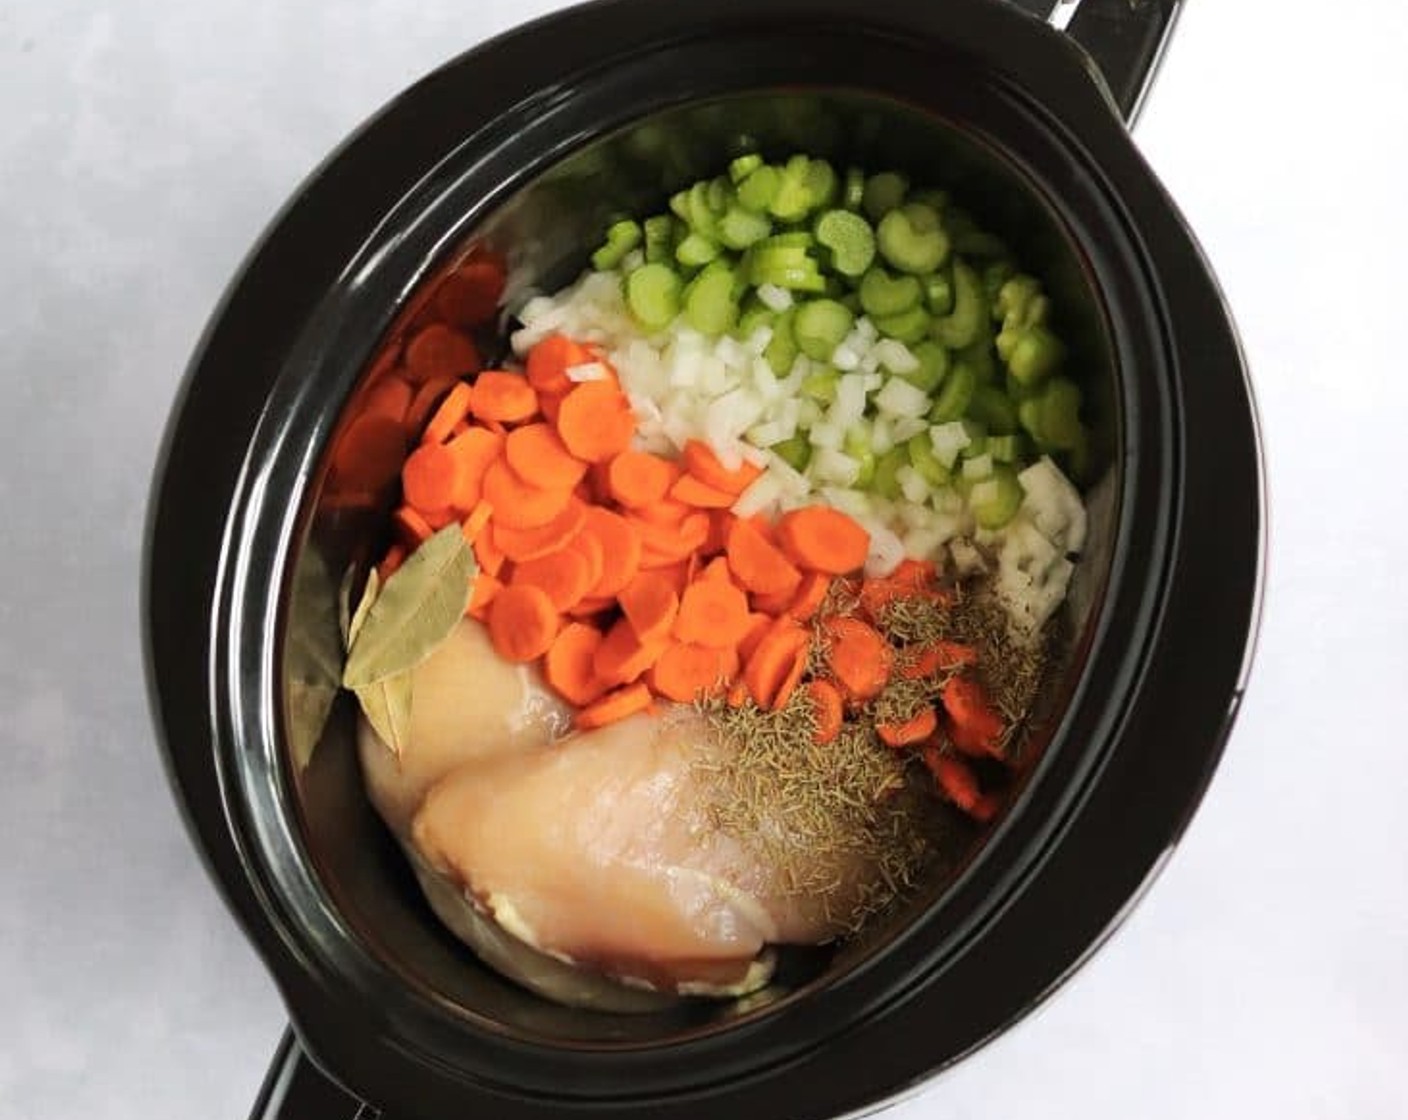 step 1 In a large slow cooker, add the Yellow Onion (1), Carrots (4), Celery (4 stalks), Garlic (4 cloves), Chicken Stock (8 cups), Boneless, Skinless Chicken Breasts (2), Bay Leaves (2), Dried Thyme (1 tsp), and Dried Rosemary (1 tsp). Season with {@10:} and Ground Black Pepper (to taste). Cook on low for 6-8 hours.